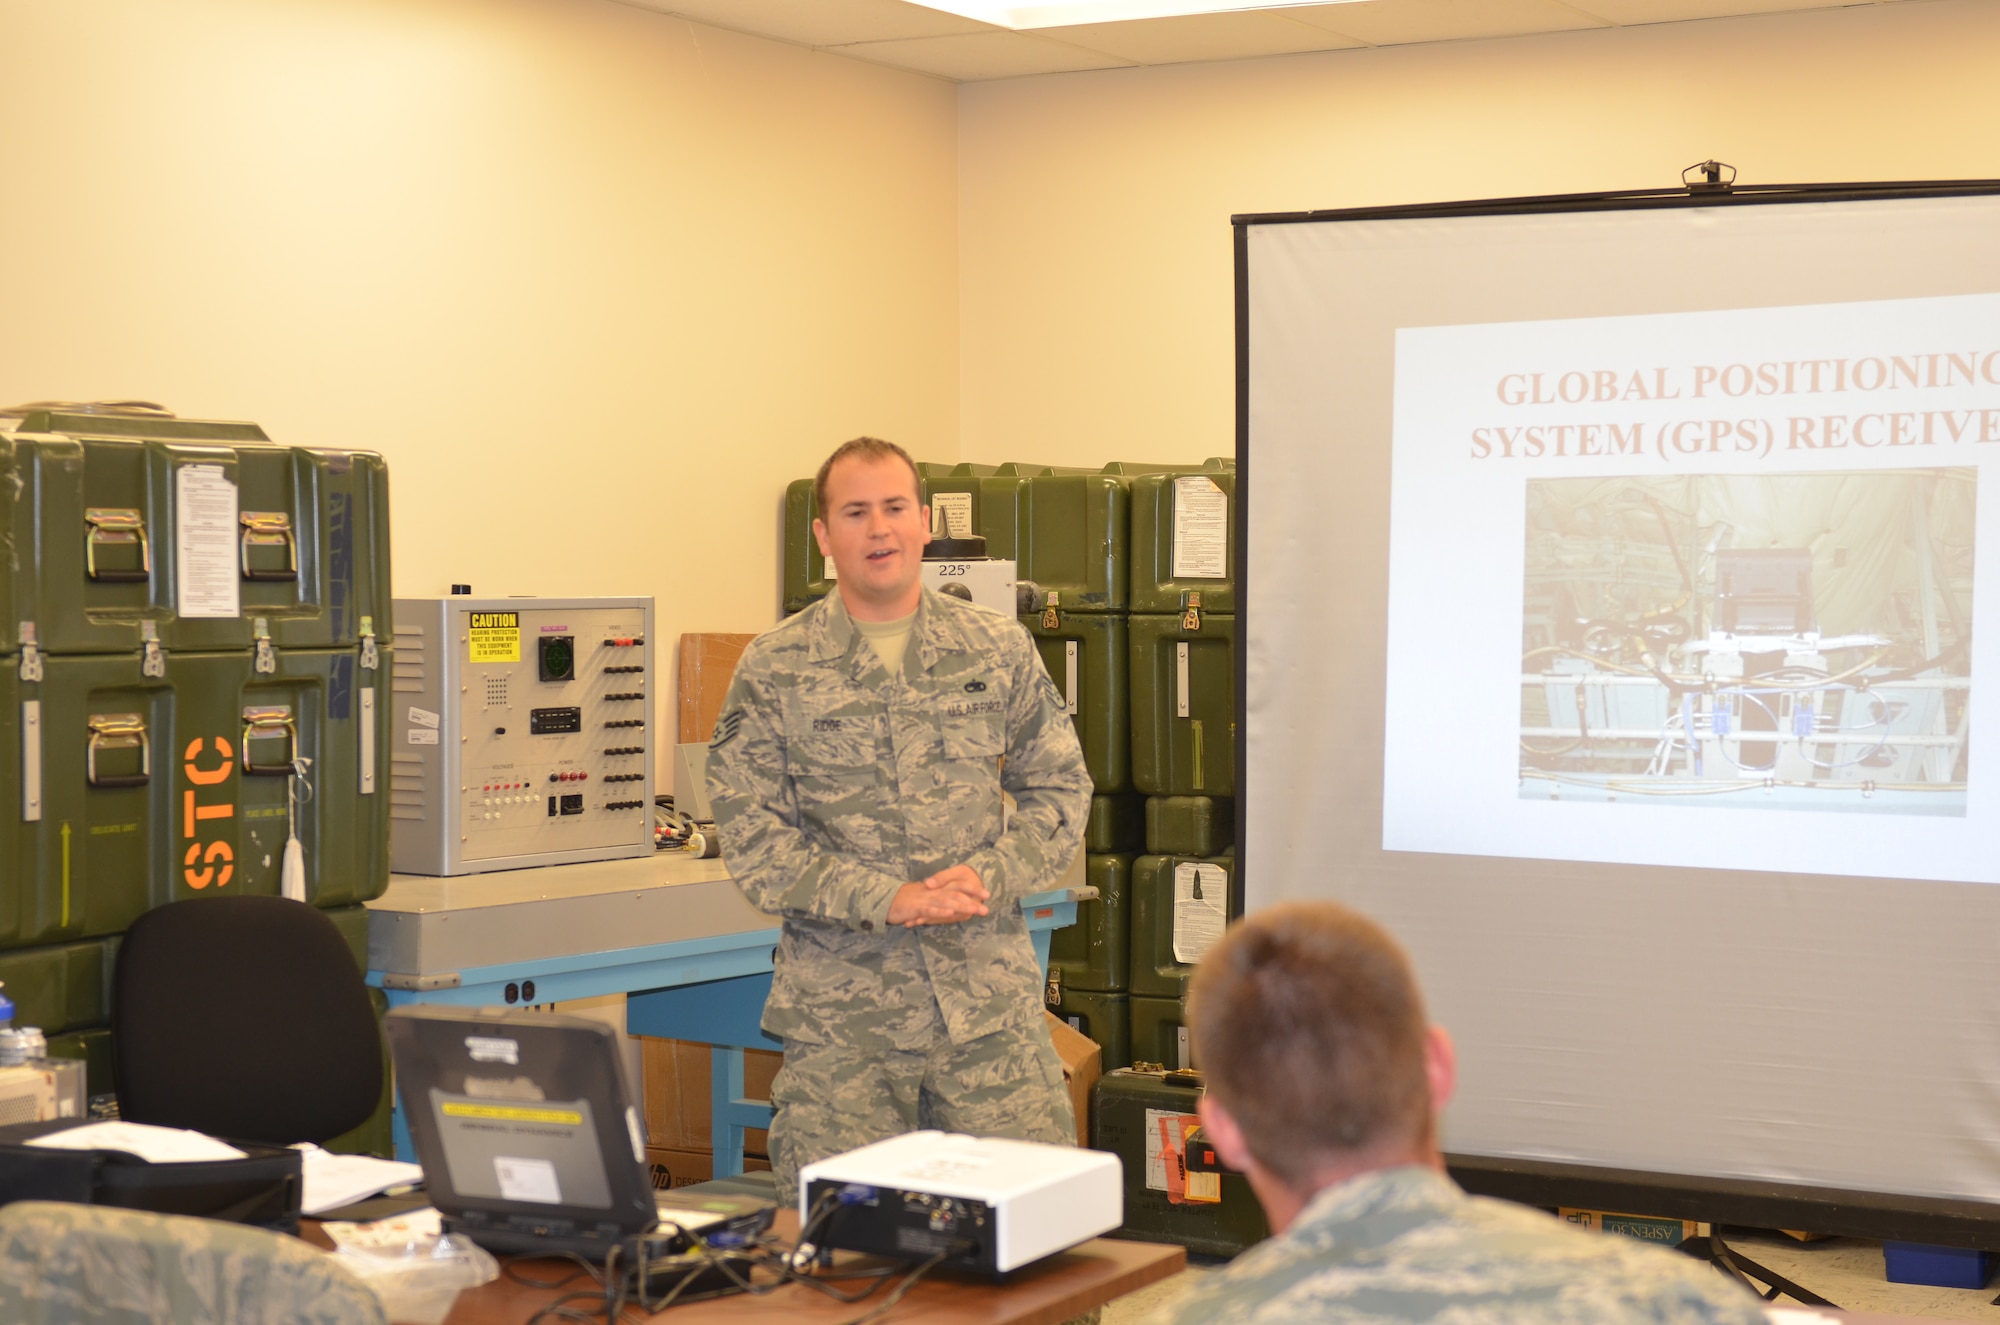 U.S. Air Force Staff Sgt. Todd Ridge teaches Communication Navigation (COMNAV) systems theory to former Electronic Warfare Counter Measures (ECM) Airmen at Rosecrans Air National Guard Base, Mo., Sept. 10, 2014.  The ECM and COMNAV career fields officially merged into one career field, Integrated Communication Counter Measures Navigation Systems, Aug. 1, 2014. (U.S. Air National Guard photo by Tech. Sgt. Theo Ramsey/Released)
